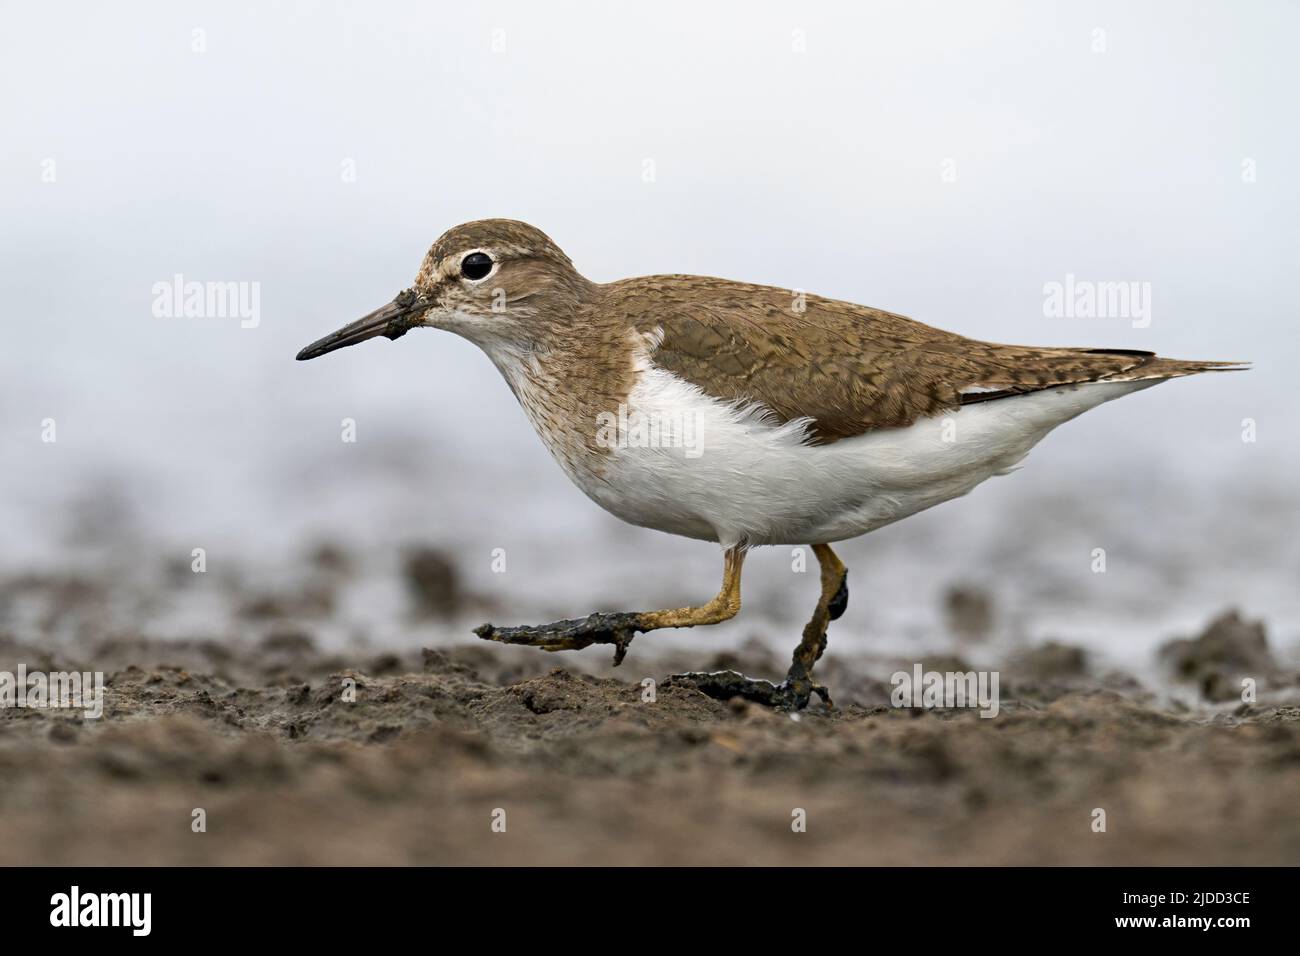 Common sandpiper (Actitis hypoleucos) in its natural enviroment Stock Photo